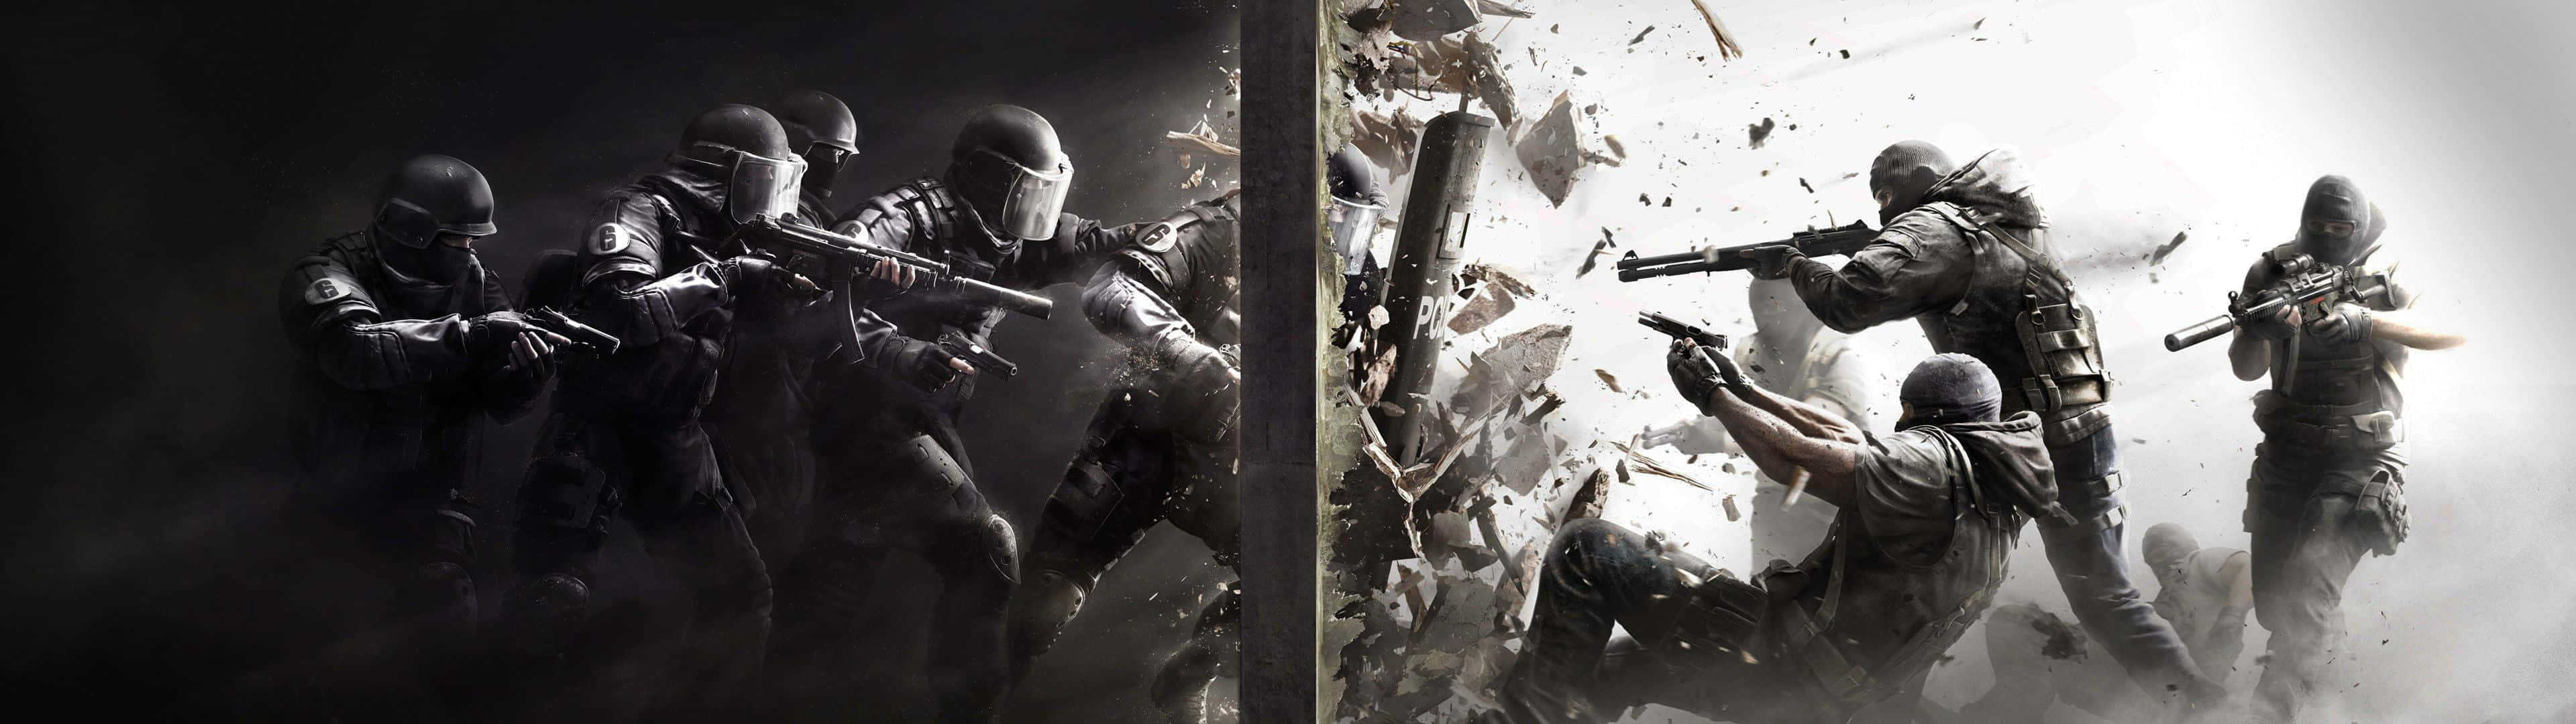 The Intense Battle - Call of Duty Soldiers in Action Wallpaper